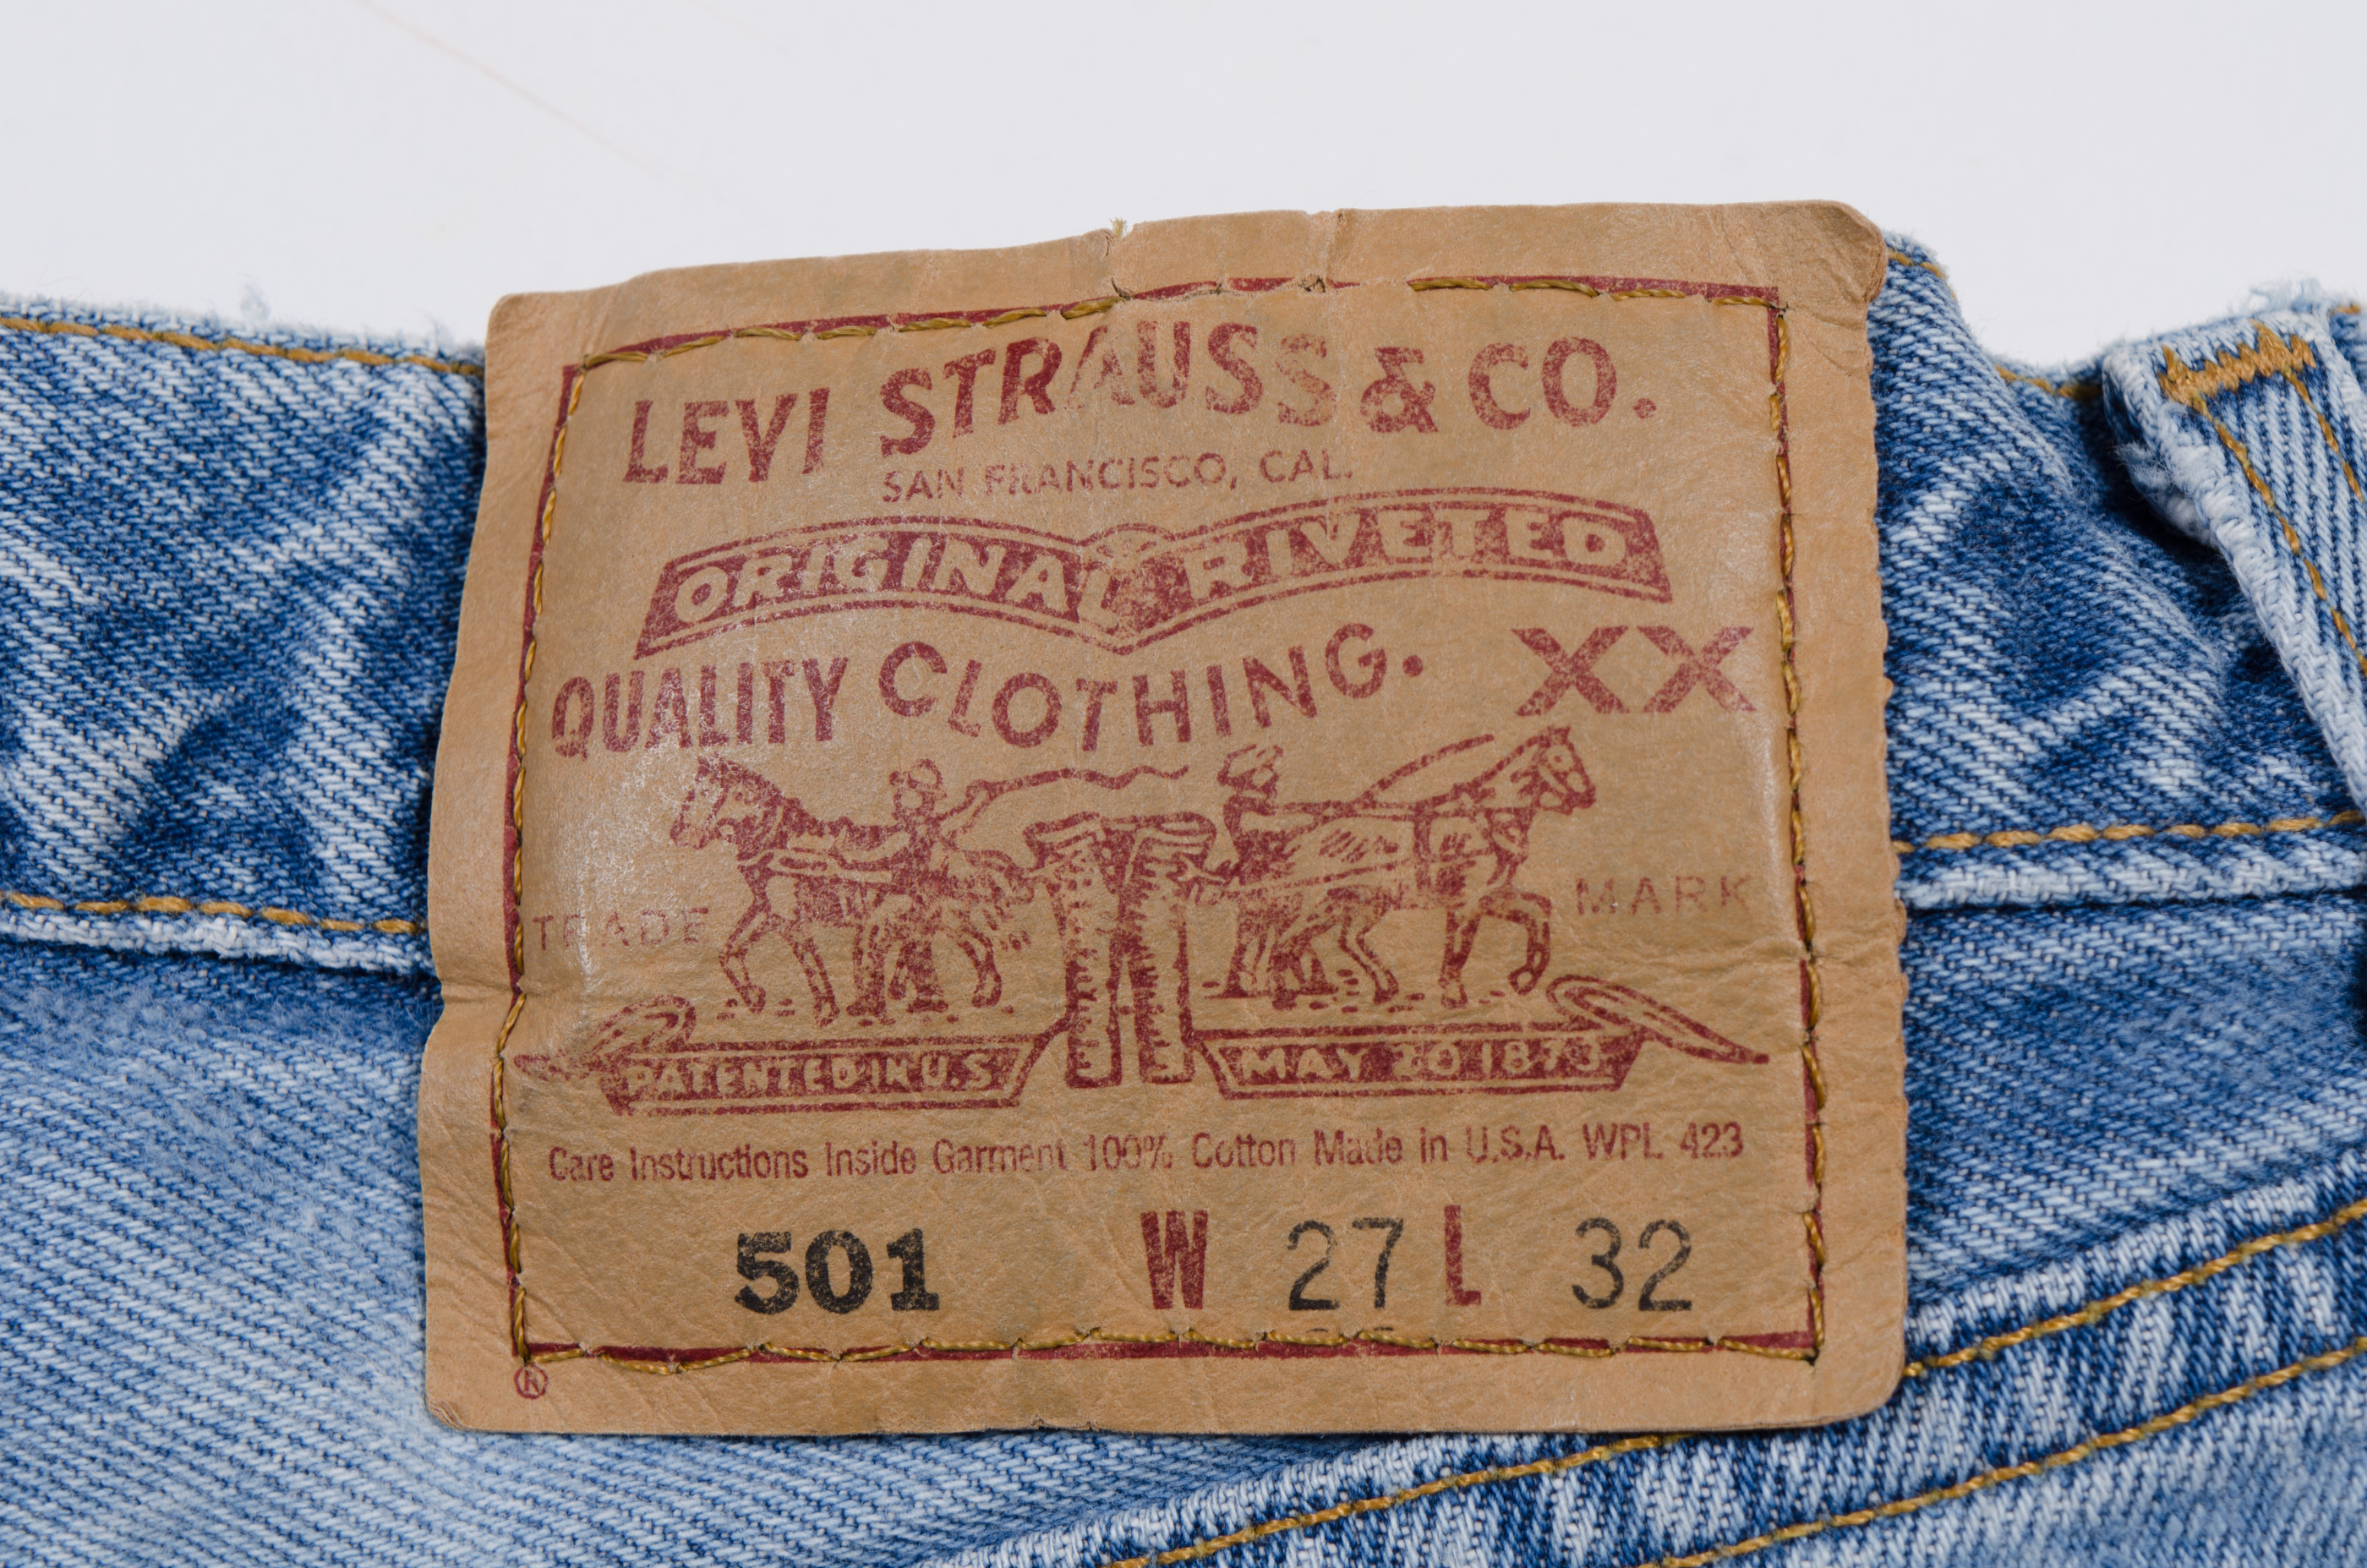 Celebrating the of the Levi's® 501® Jean - Levi & Co : Strauss & Co